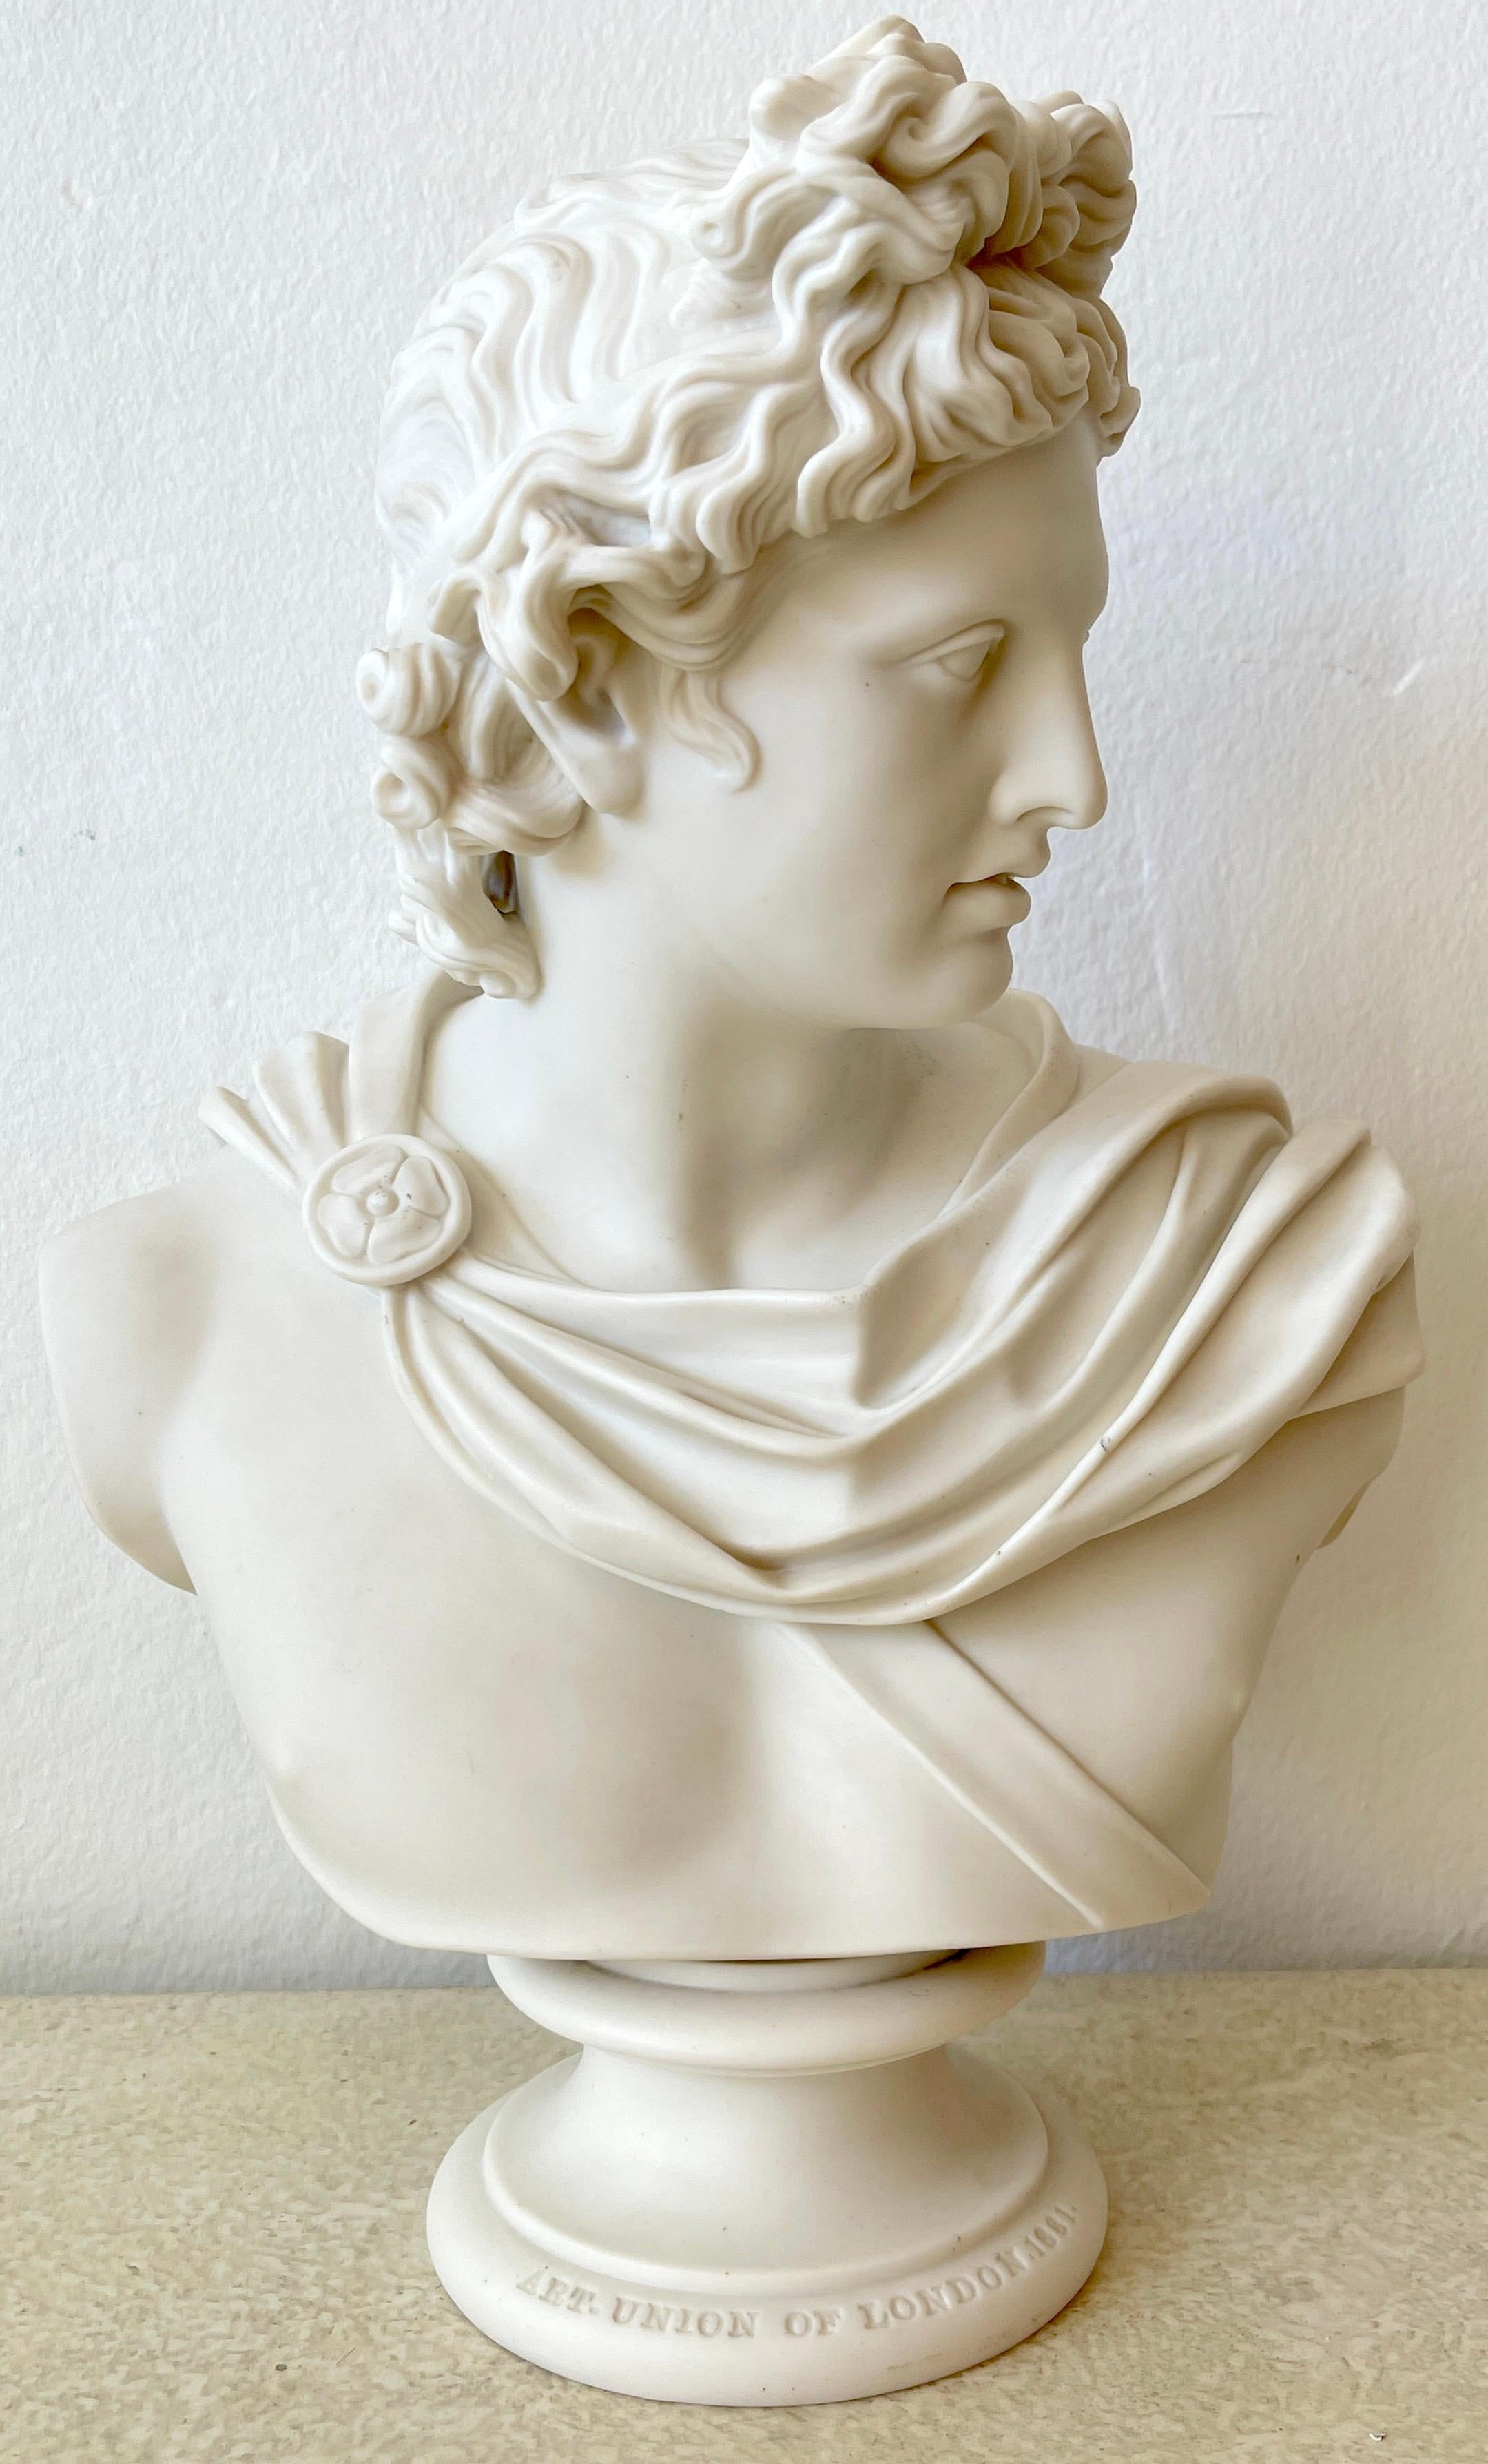 Art Union of London Parian Bust of Apollo Belvedere, by C. Delpech, 1861
Published February 1, 1861
Of good size, looking to the right, draped with a fastened medallion. 
The bust stands 14